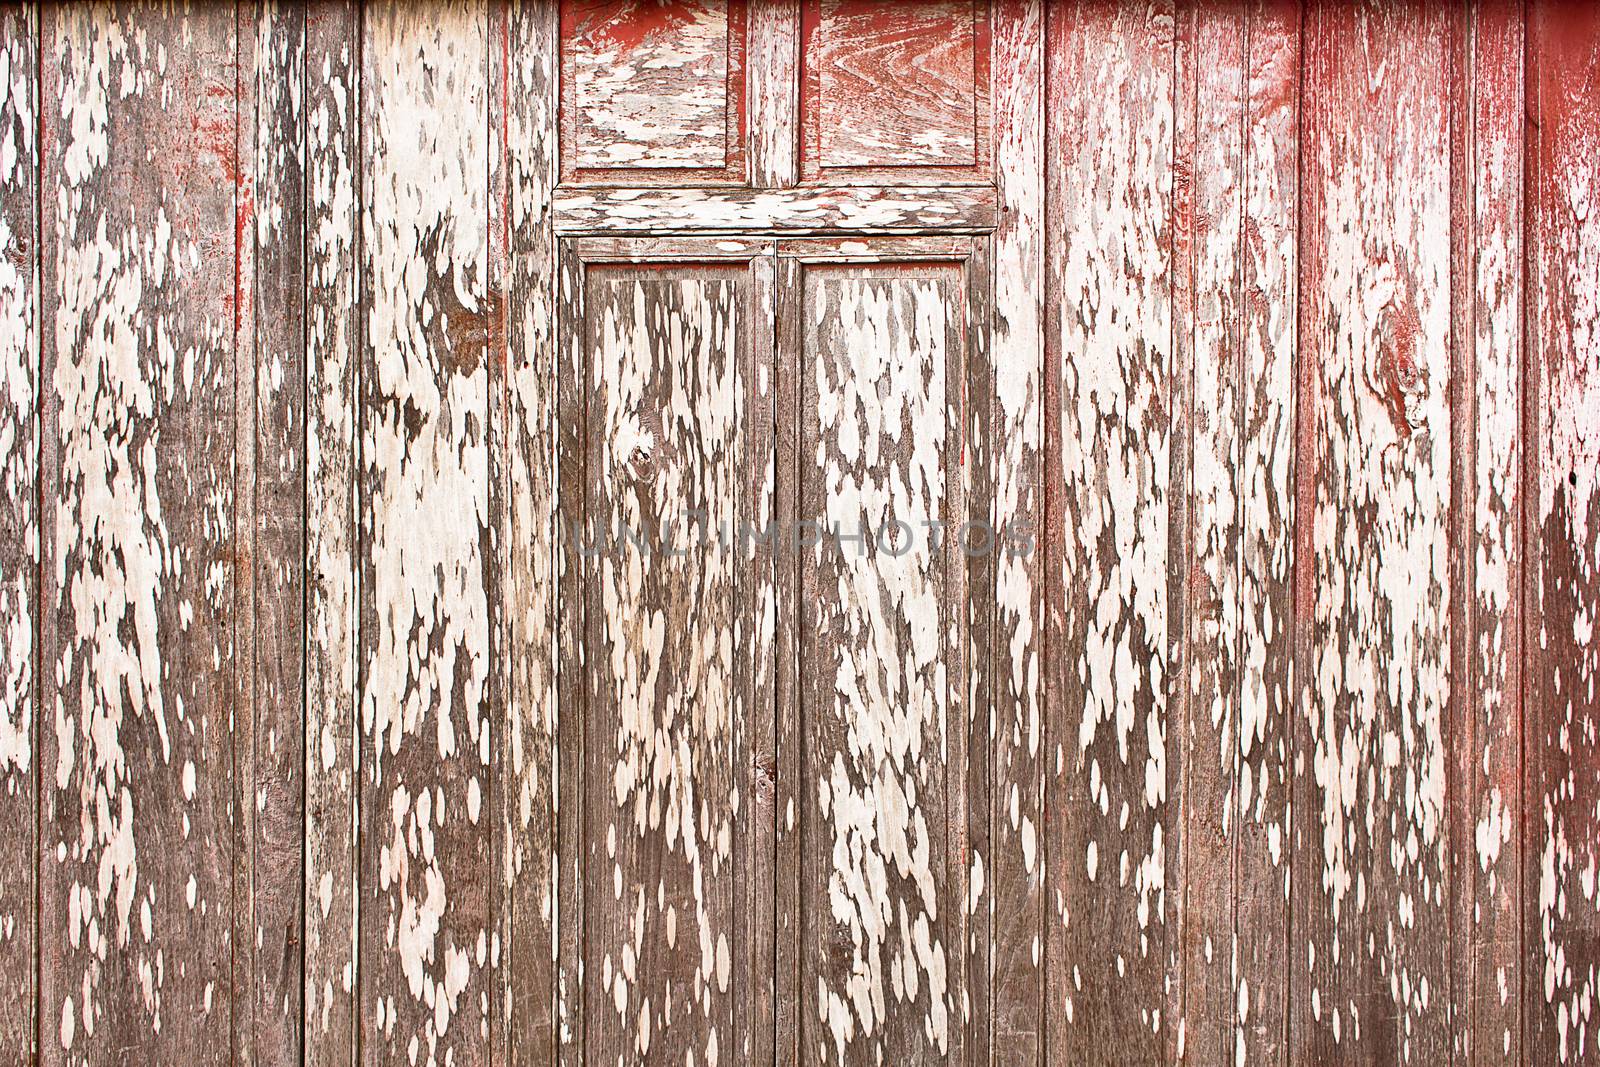 Wooden stain with texture background